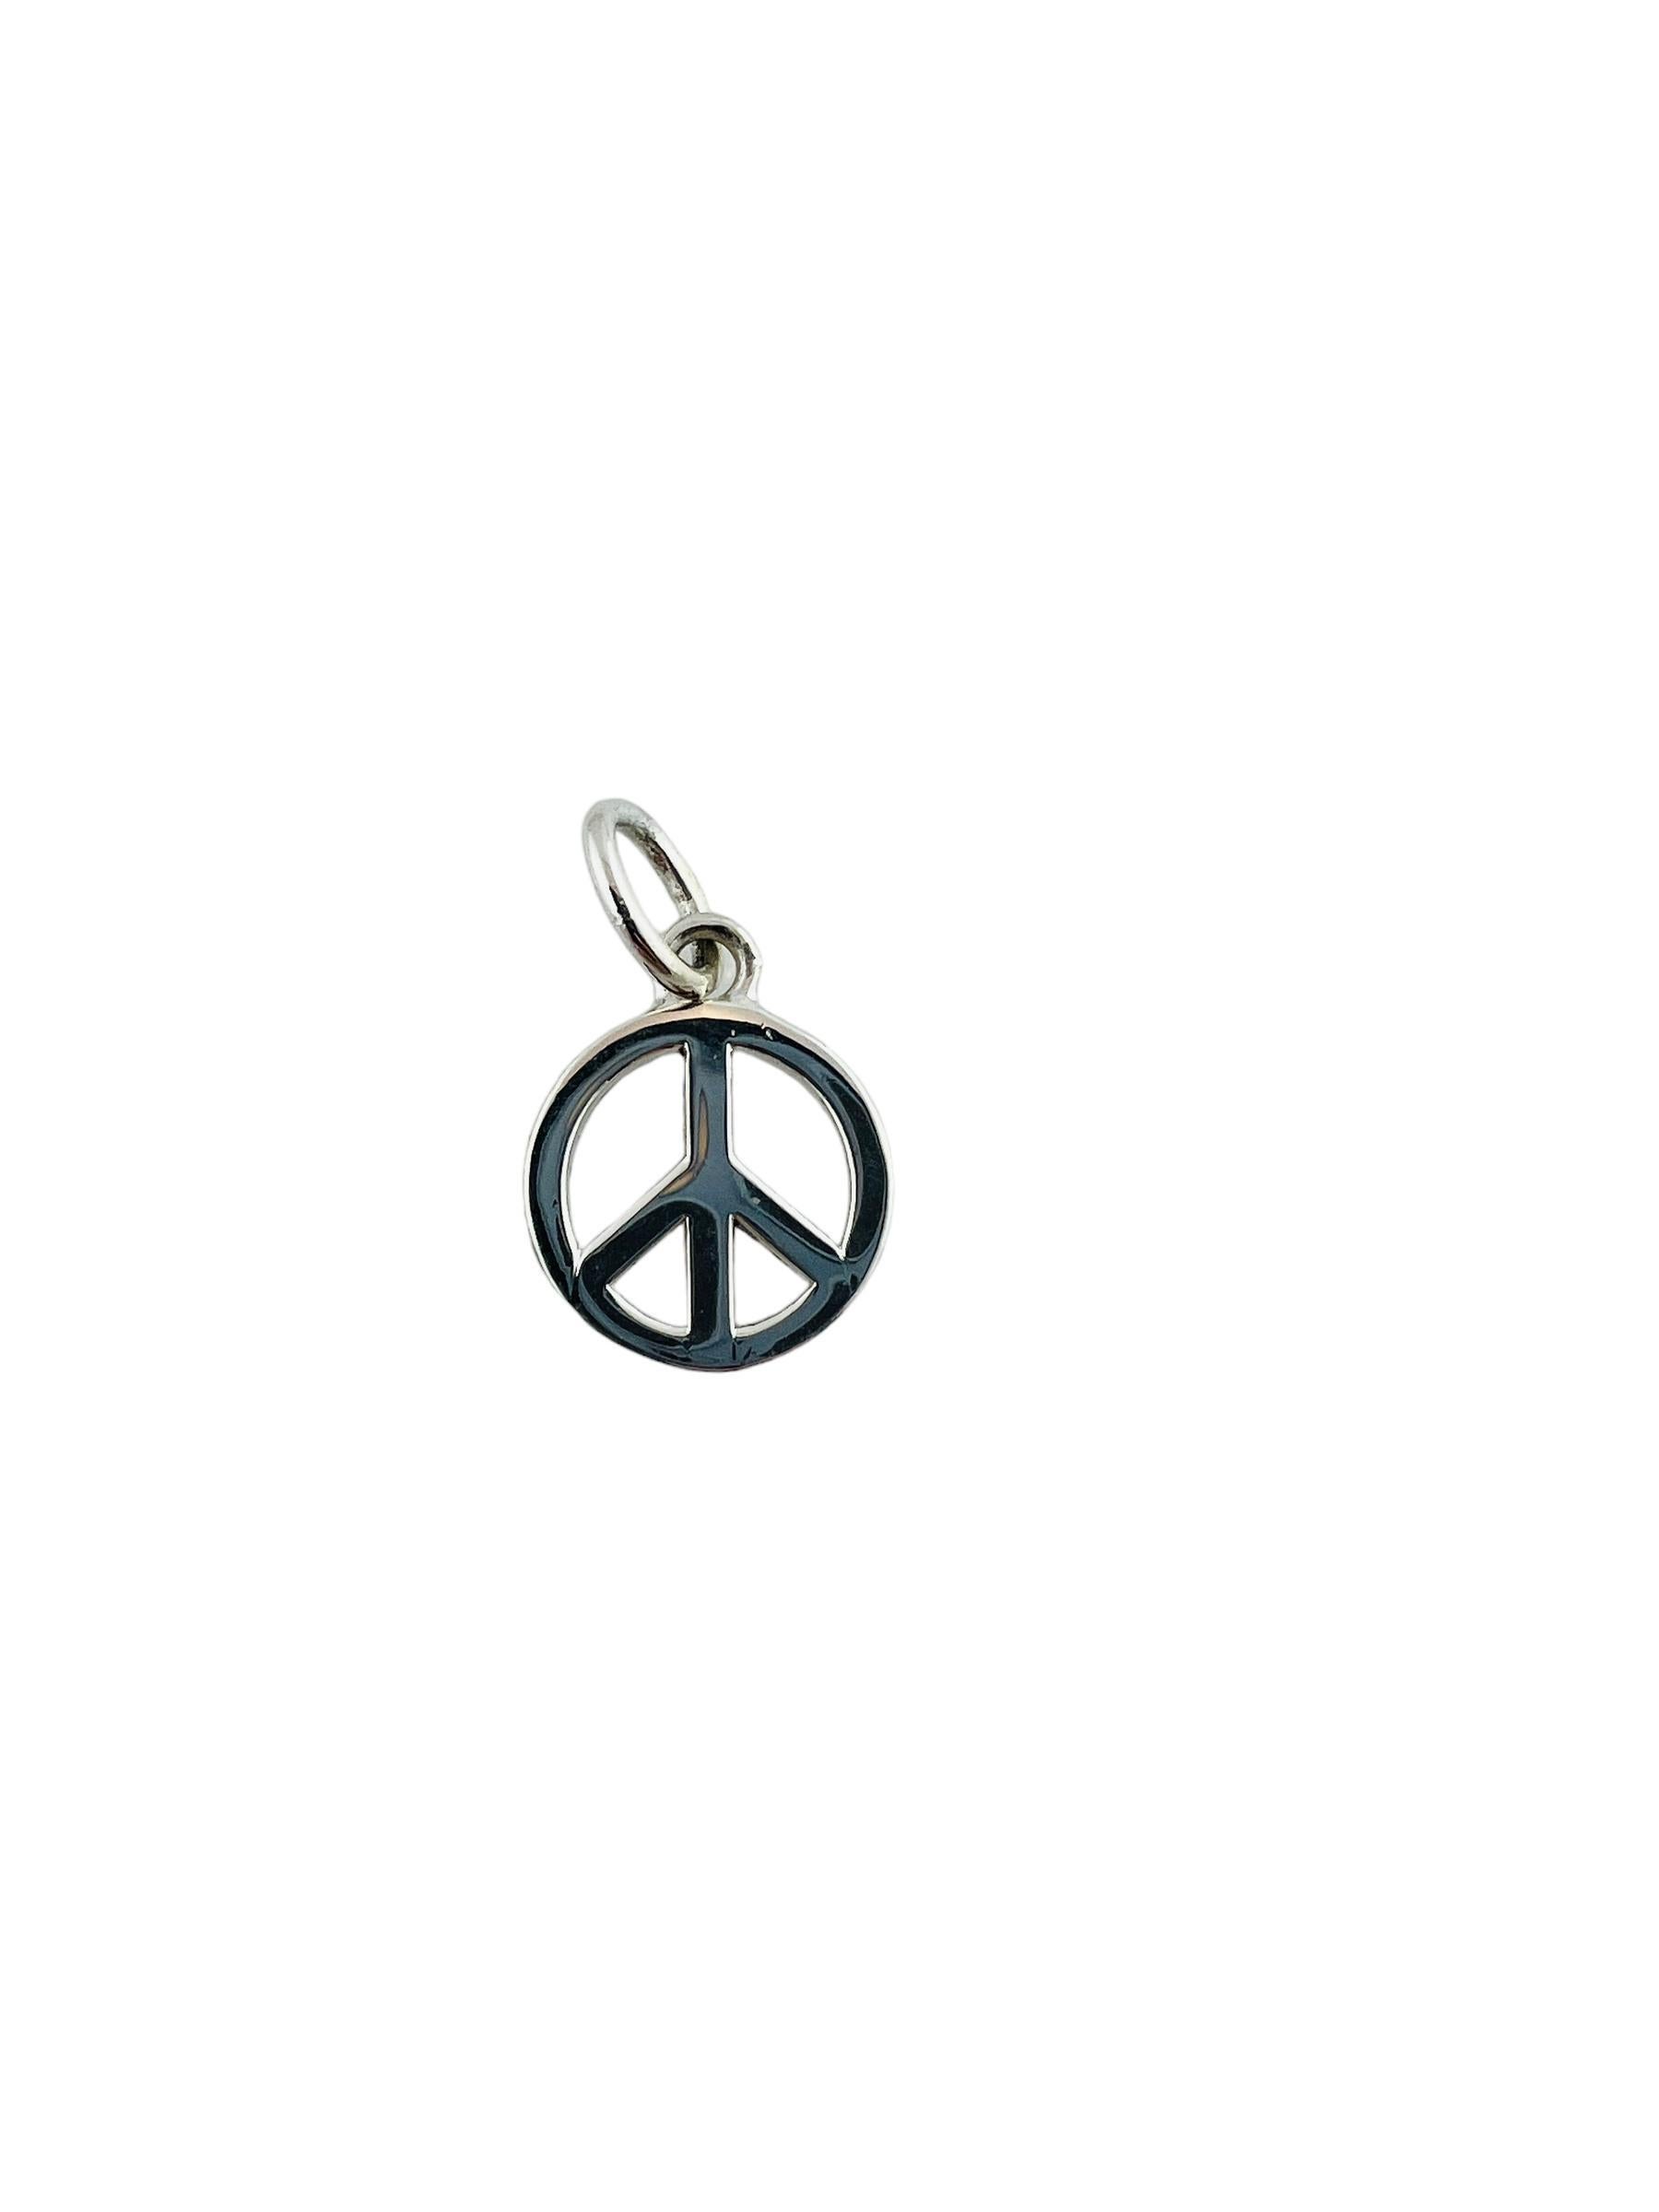 Tiffany & Co. Sterling Silver Peace Sign Pendant #15448 2